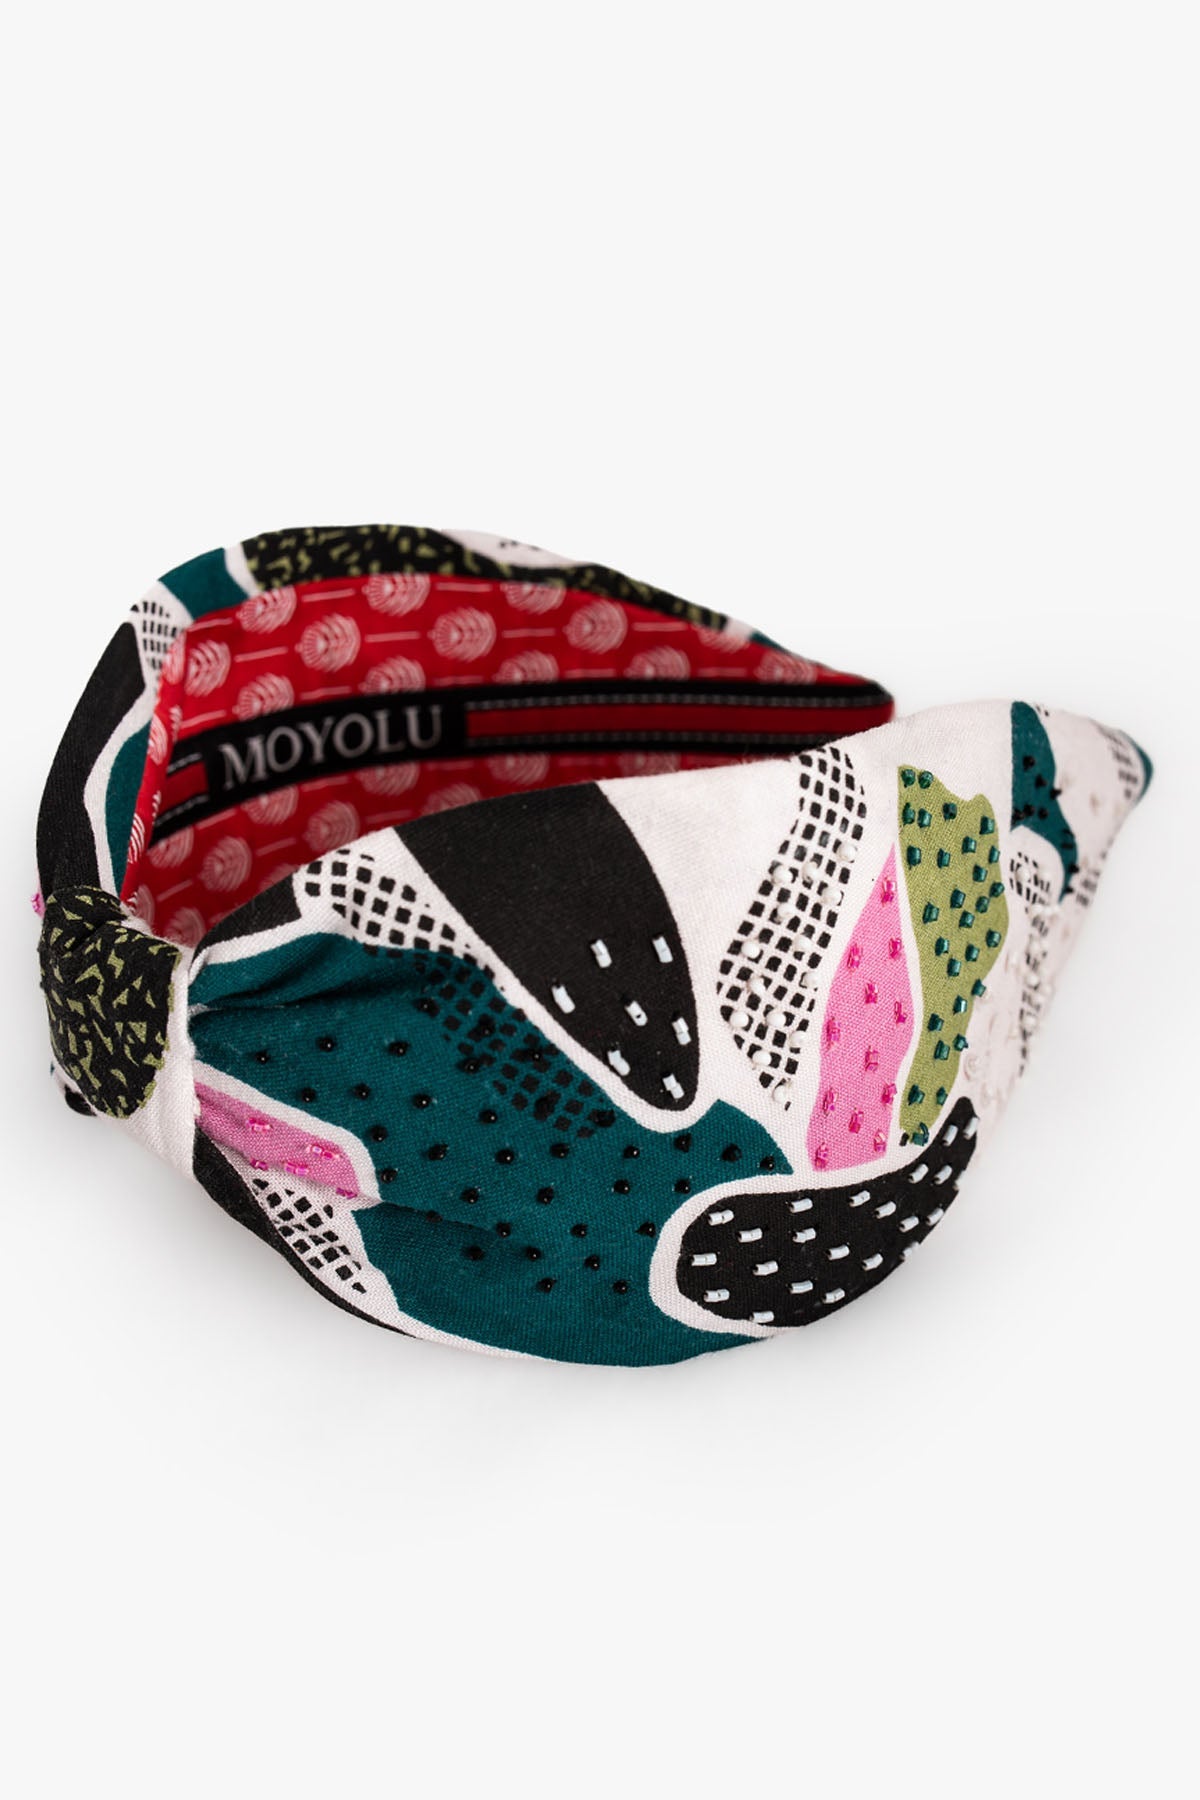 Moyolu Multicolor Abstract Headband Accessories online at ScrollnShops